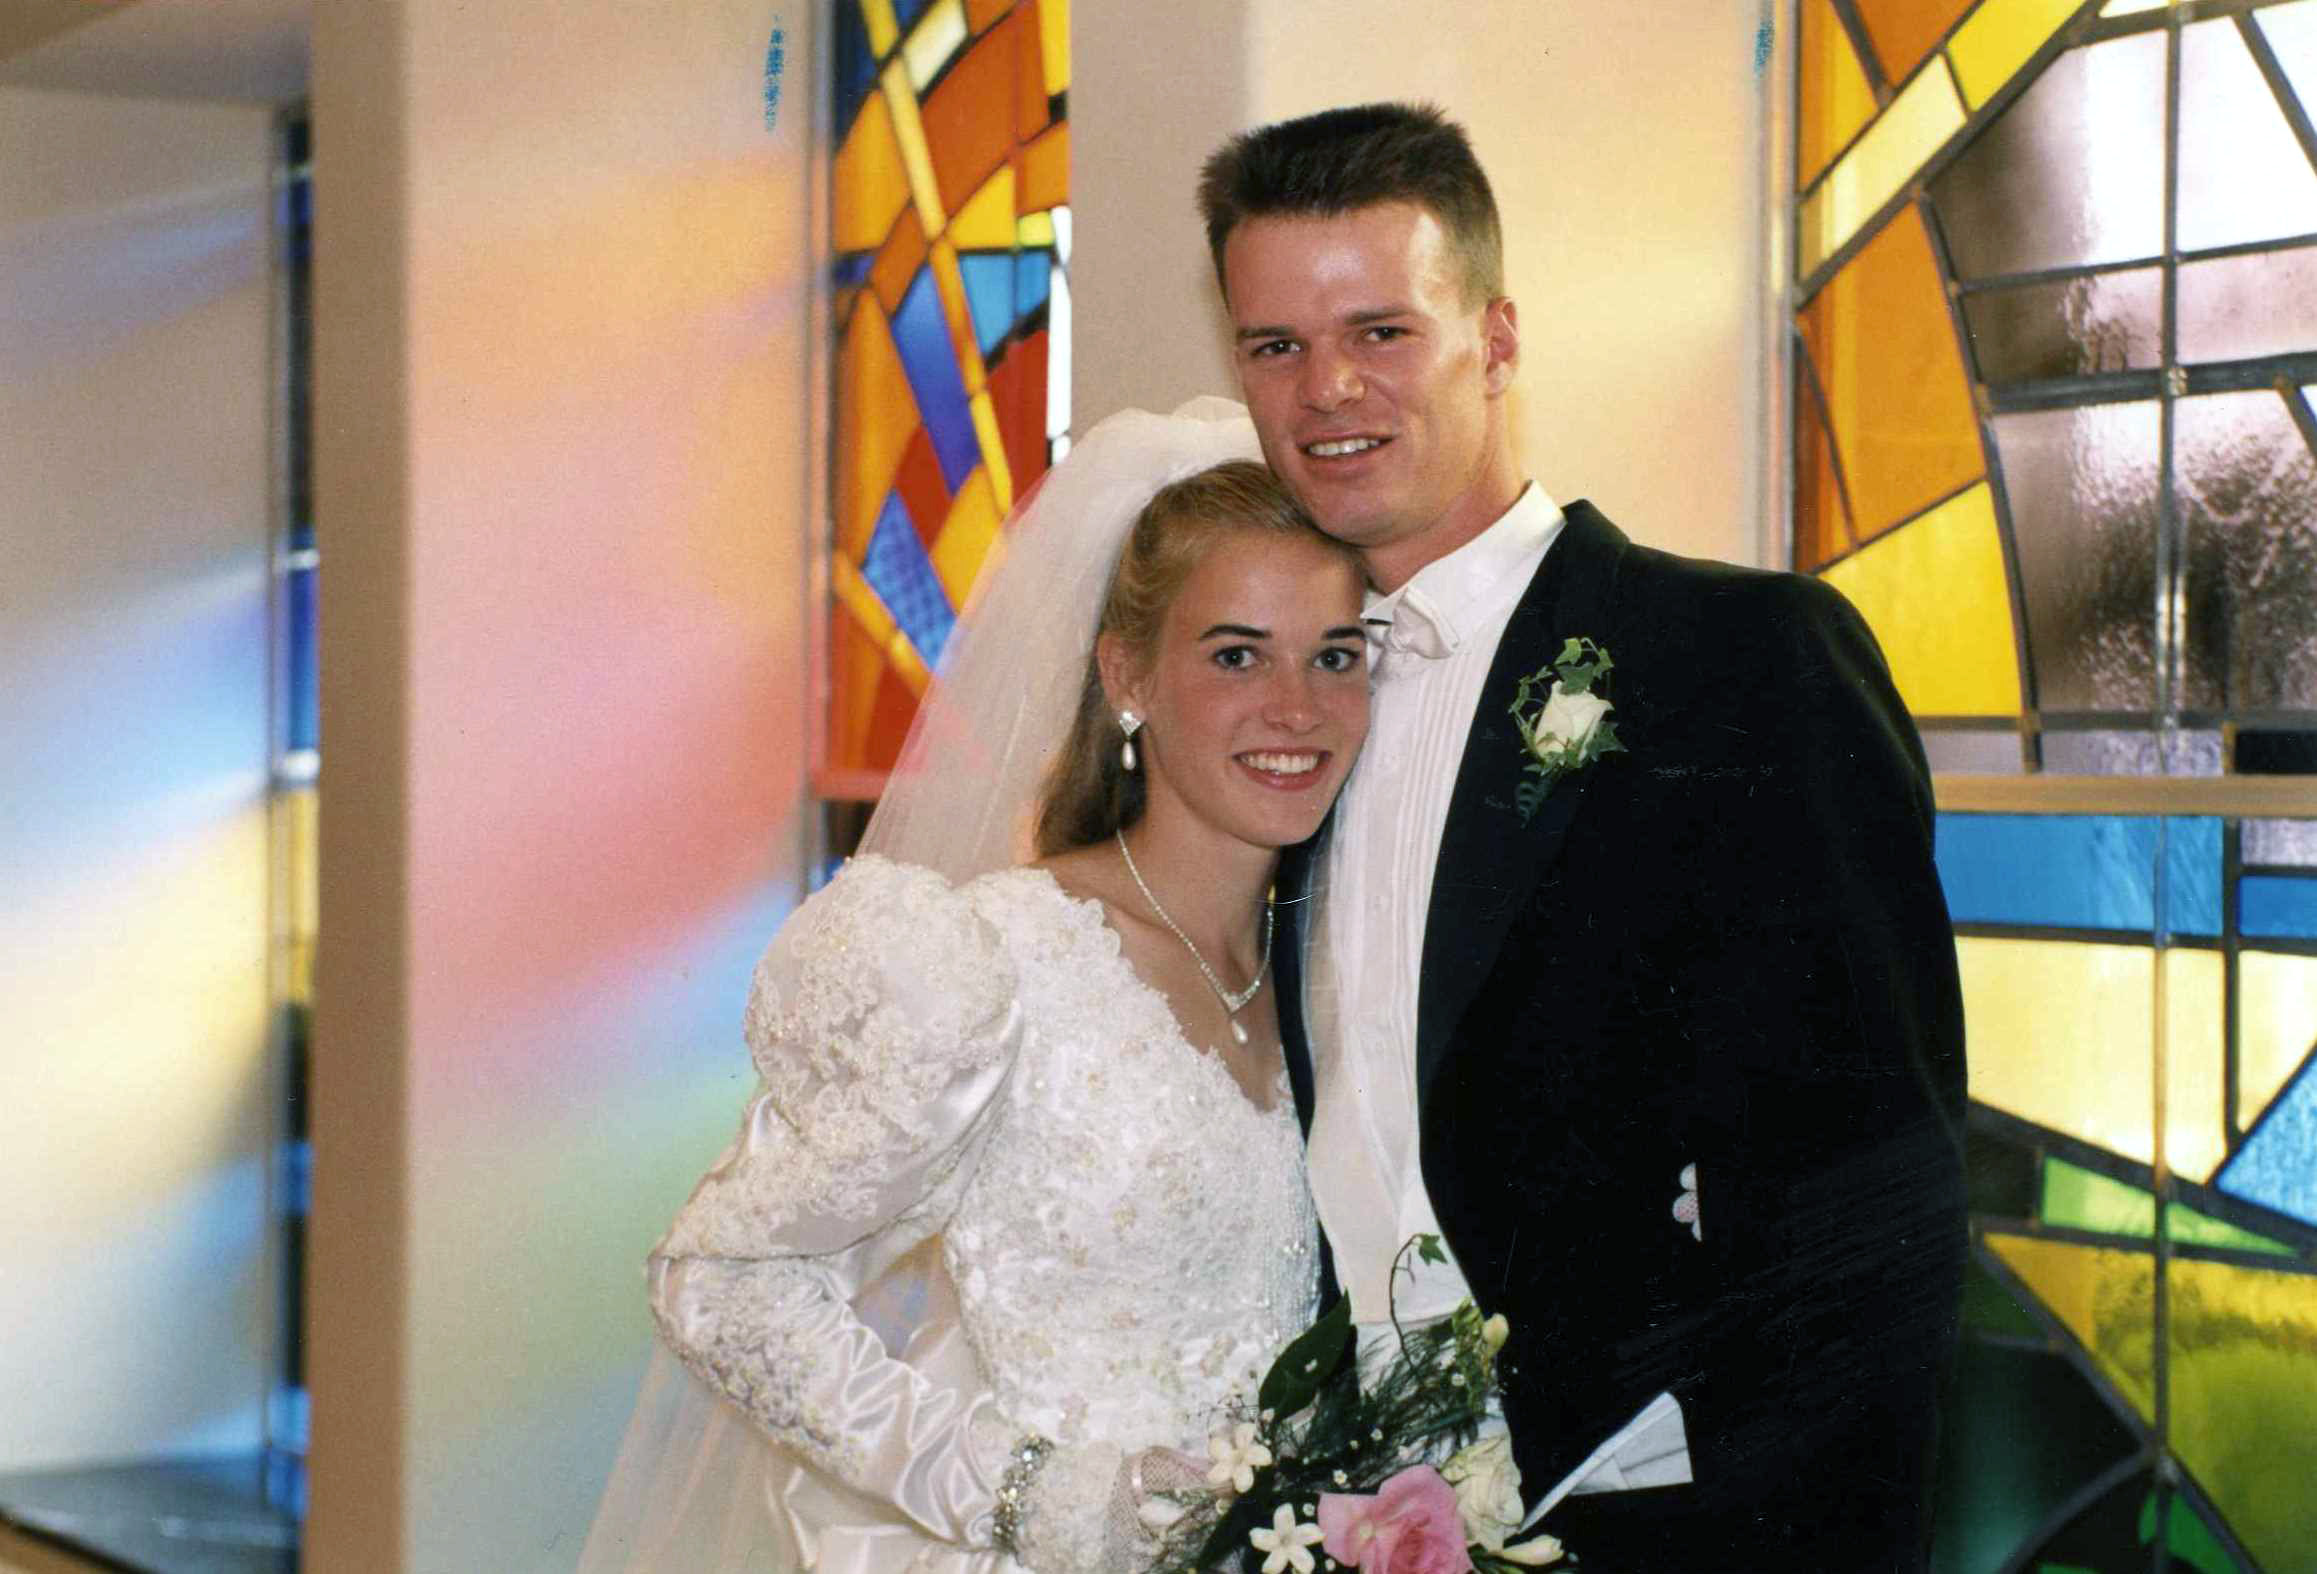 PHOTO: Suzy Favor Hamilton and Mark Hamilton were married a week after they graduated from University of Wisconsin-Madison.